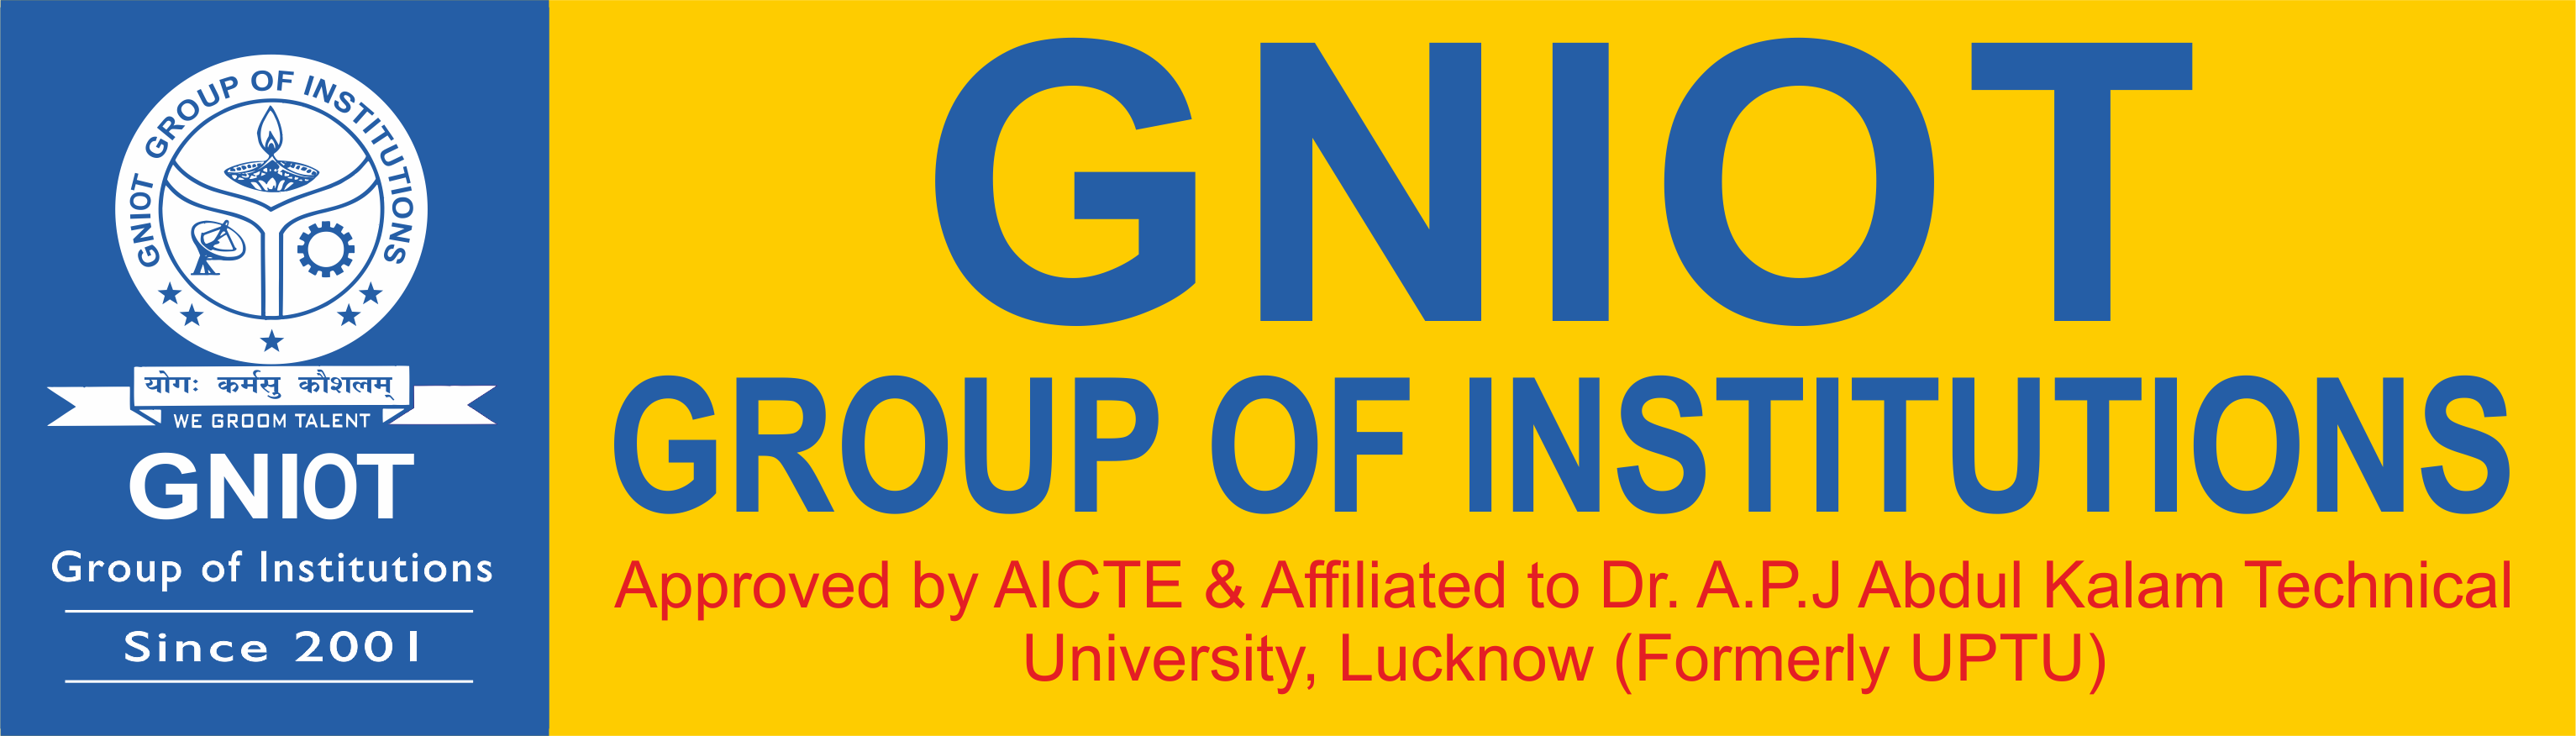 Greater Noida Institute Of Technology (GNIOT) ,India